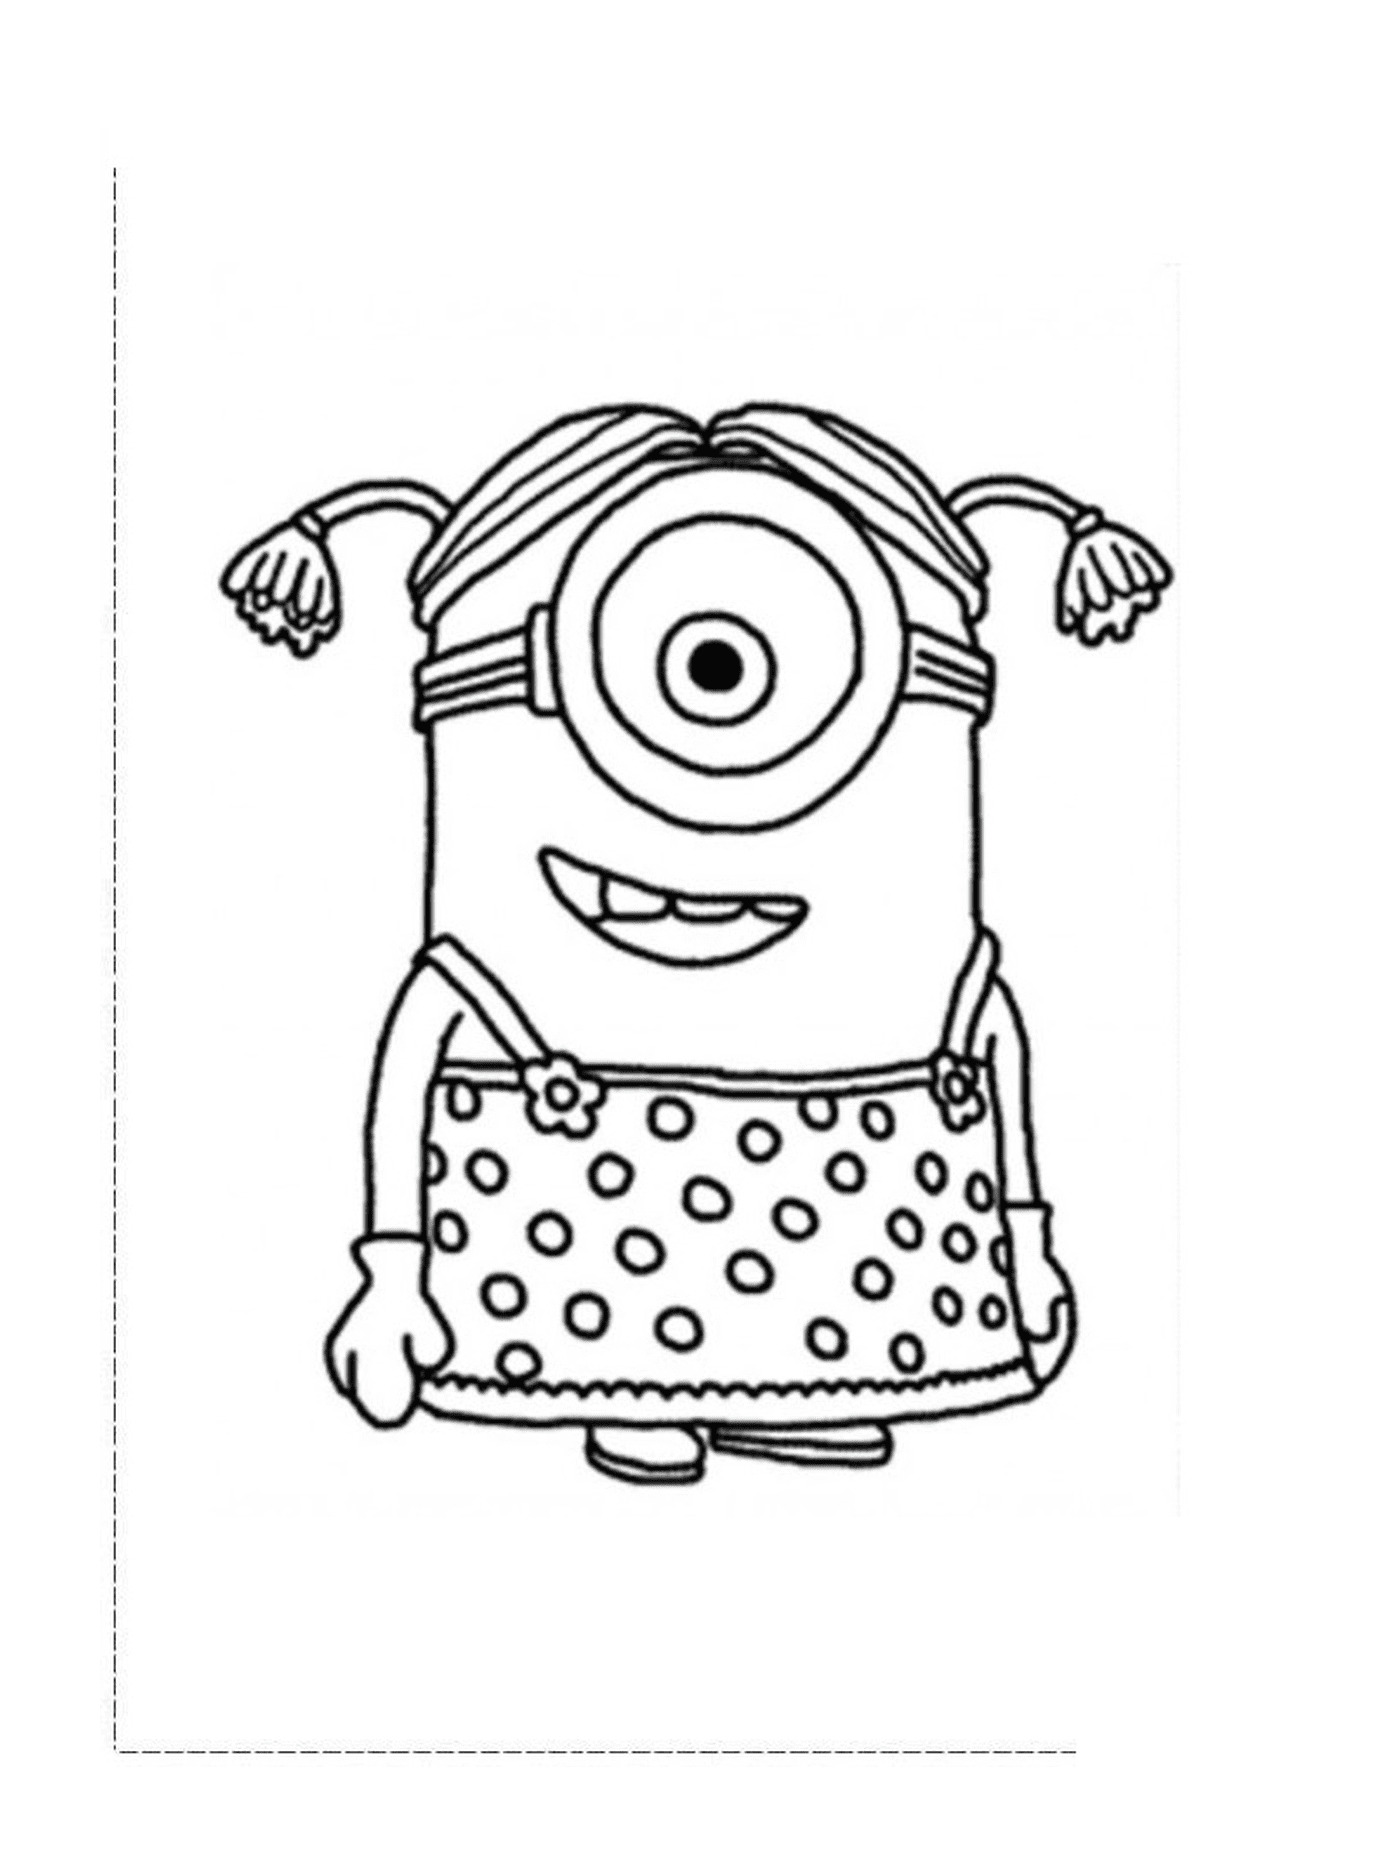  Minion girl with an eye, animated character 